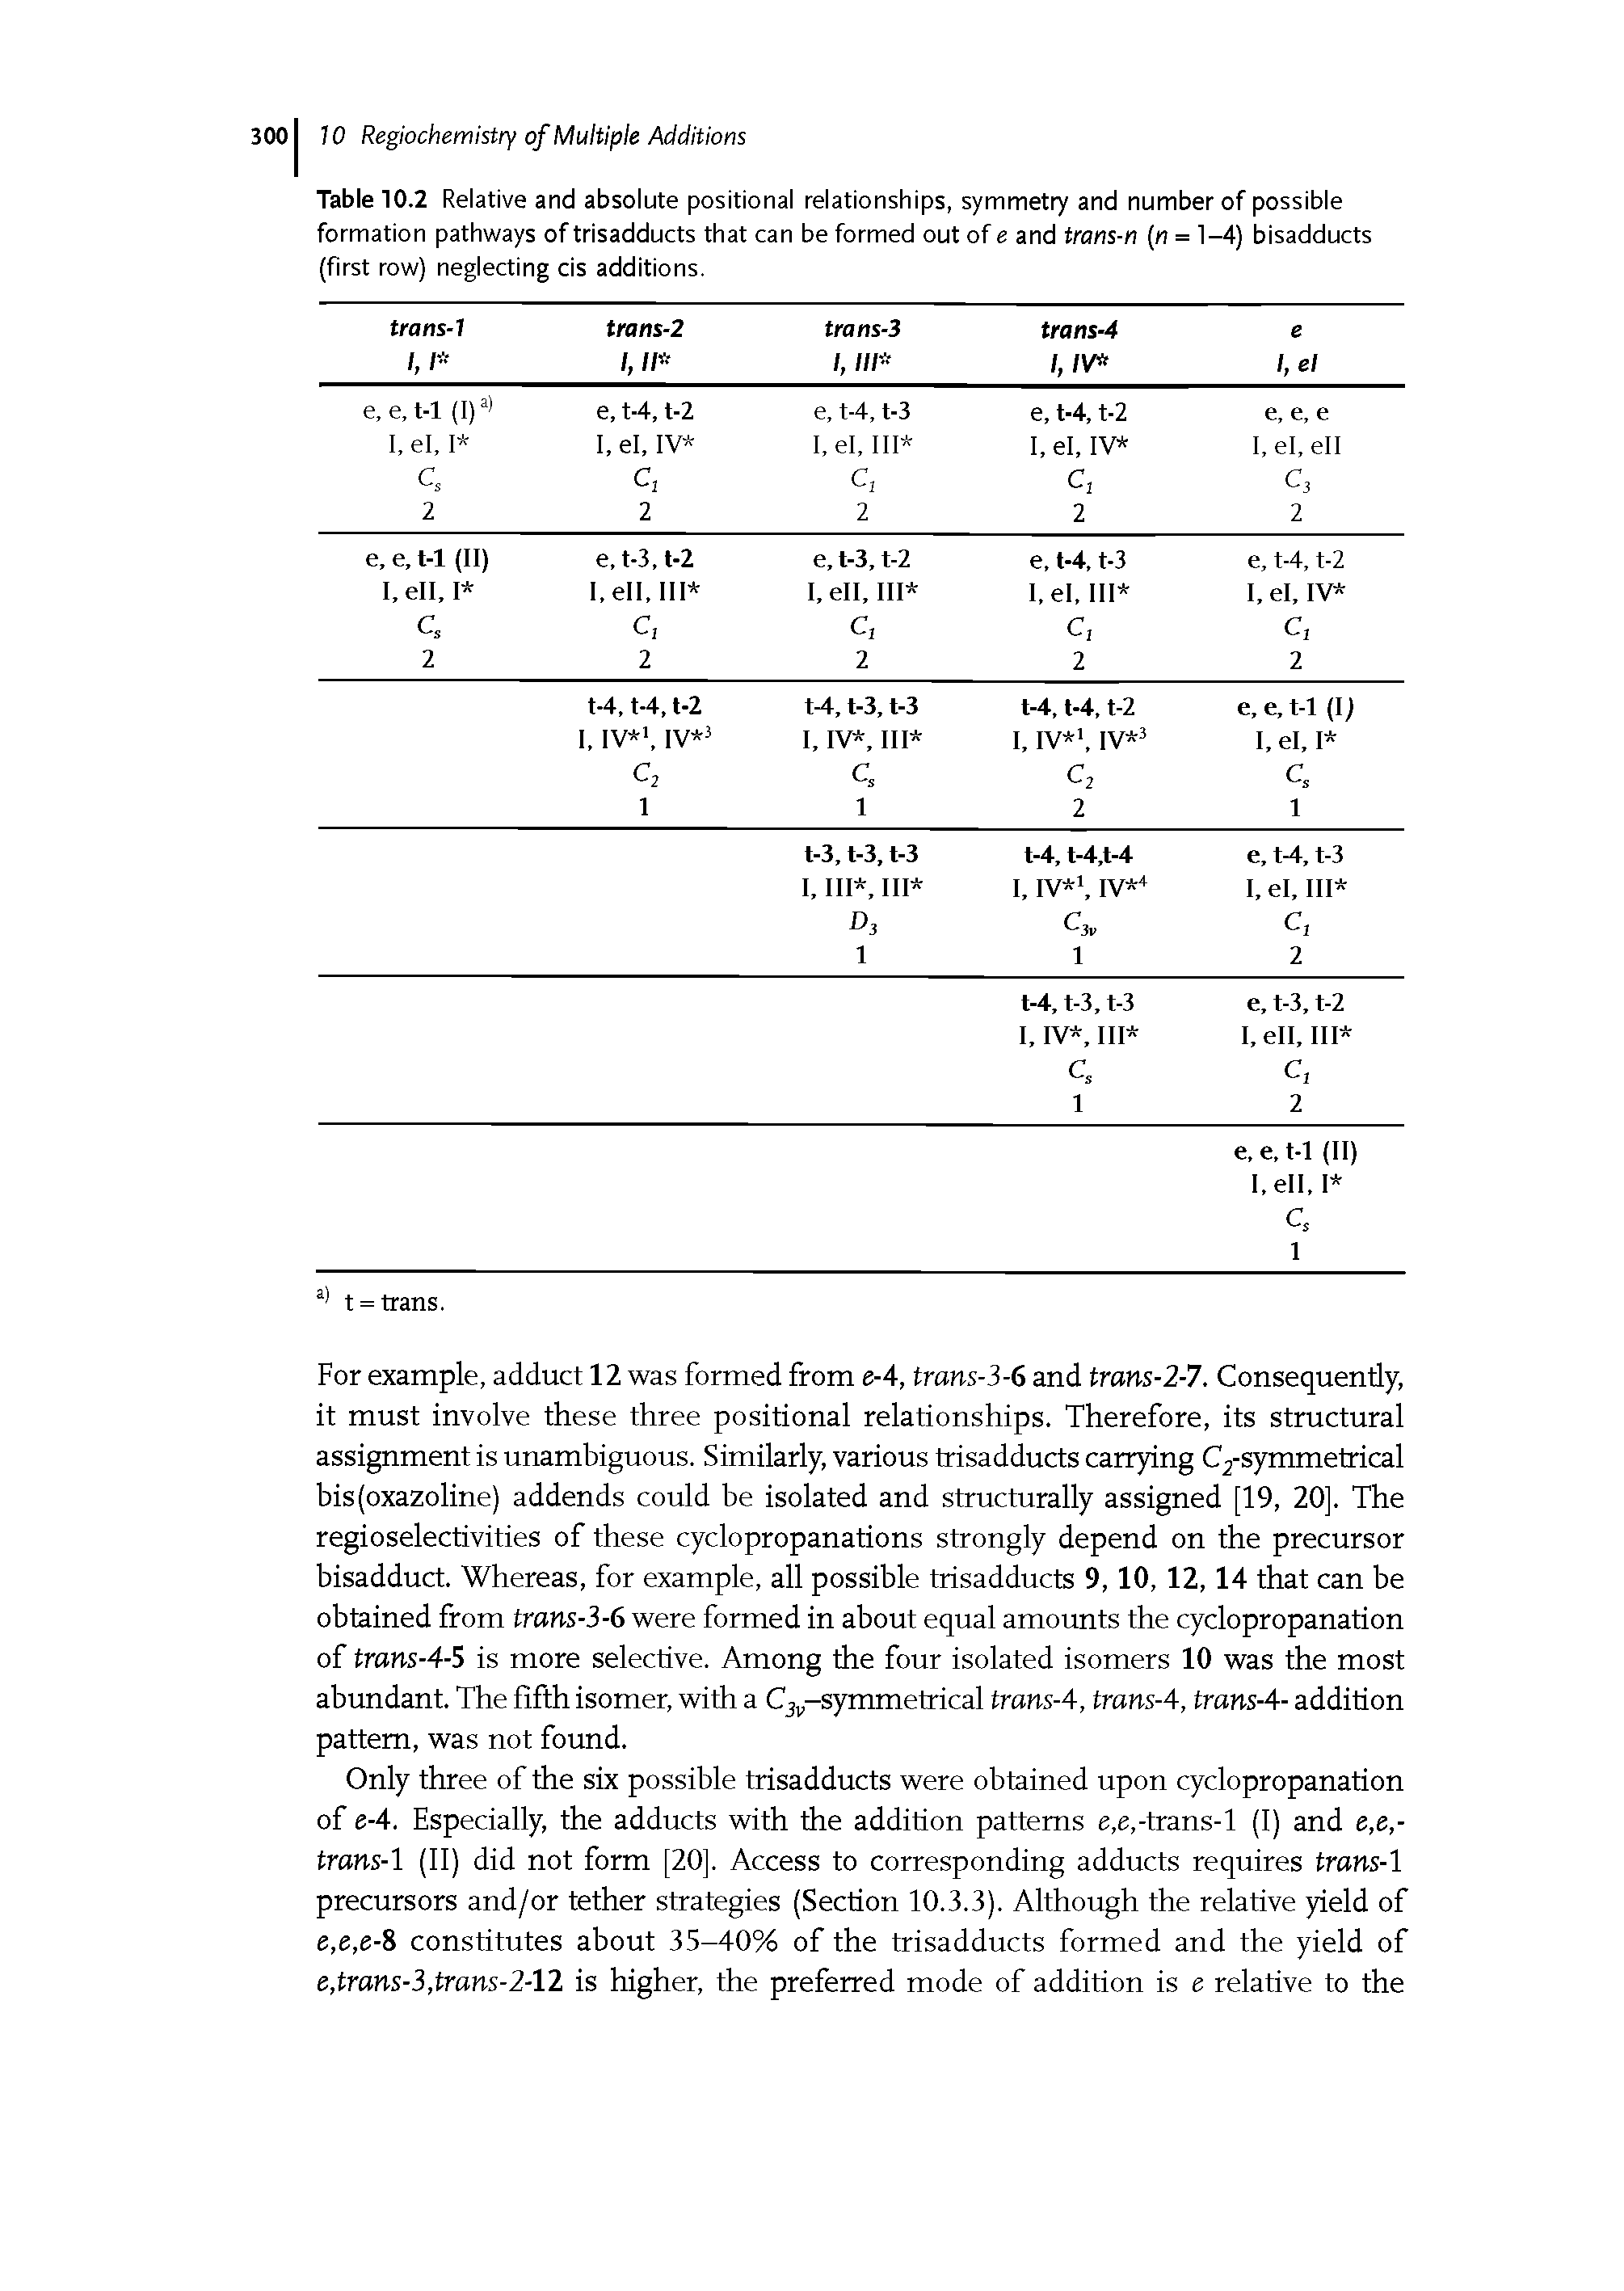 Table 10.2 Relative and absolute positional relationships, symmetry and number of possible formation pathways oftrisadducts that can be formed out of e and trans-n [n = 1-4) bisadducts (first row) neglecting cis additions.